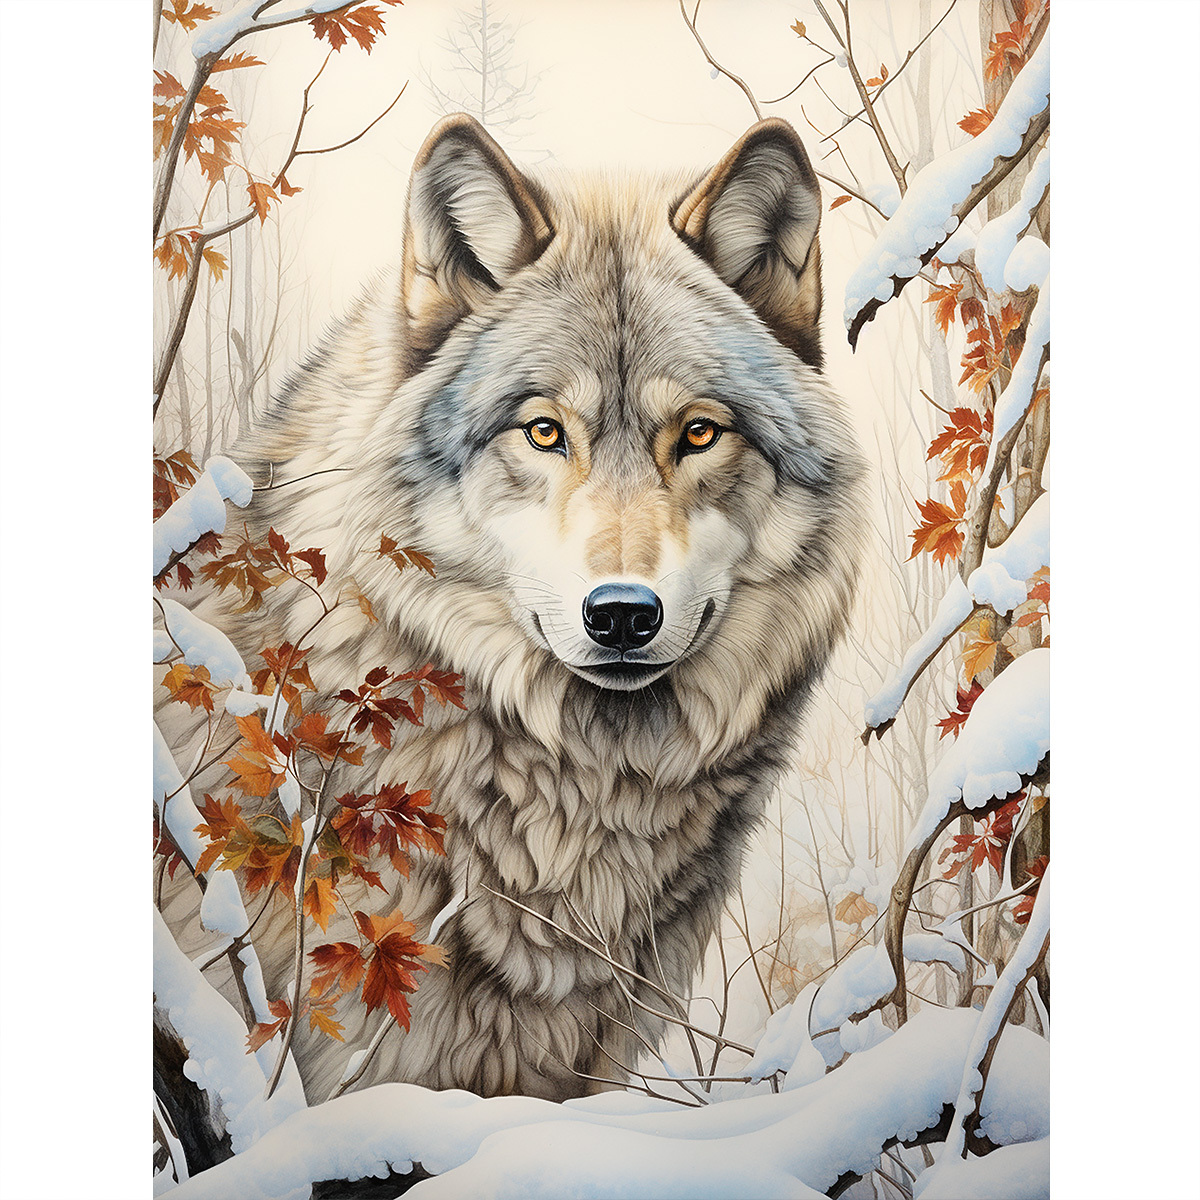 Wolf Diamond Painting Kit - 5D DIY Diamond Art with Round Diamonds for Home  Wall Decor and Gifts (12x16 Inches)